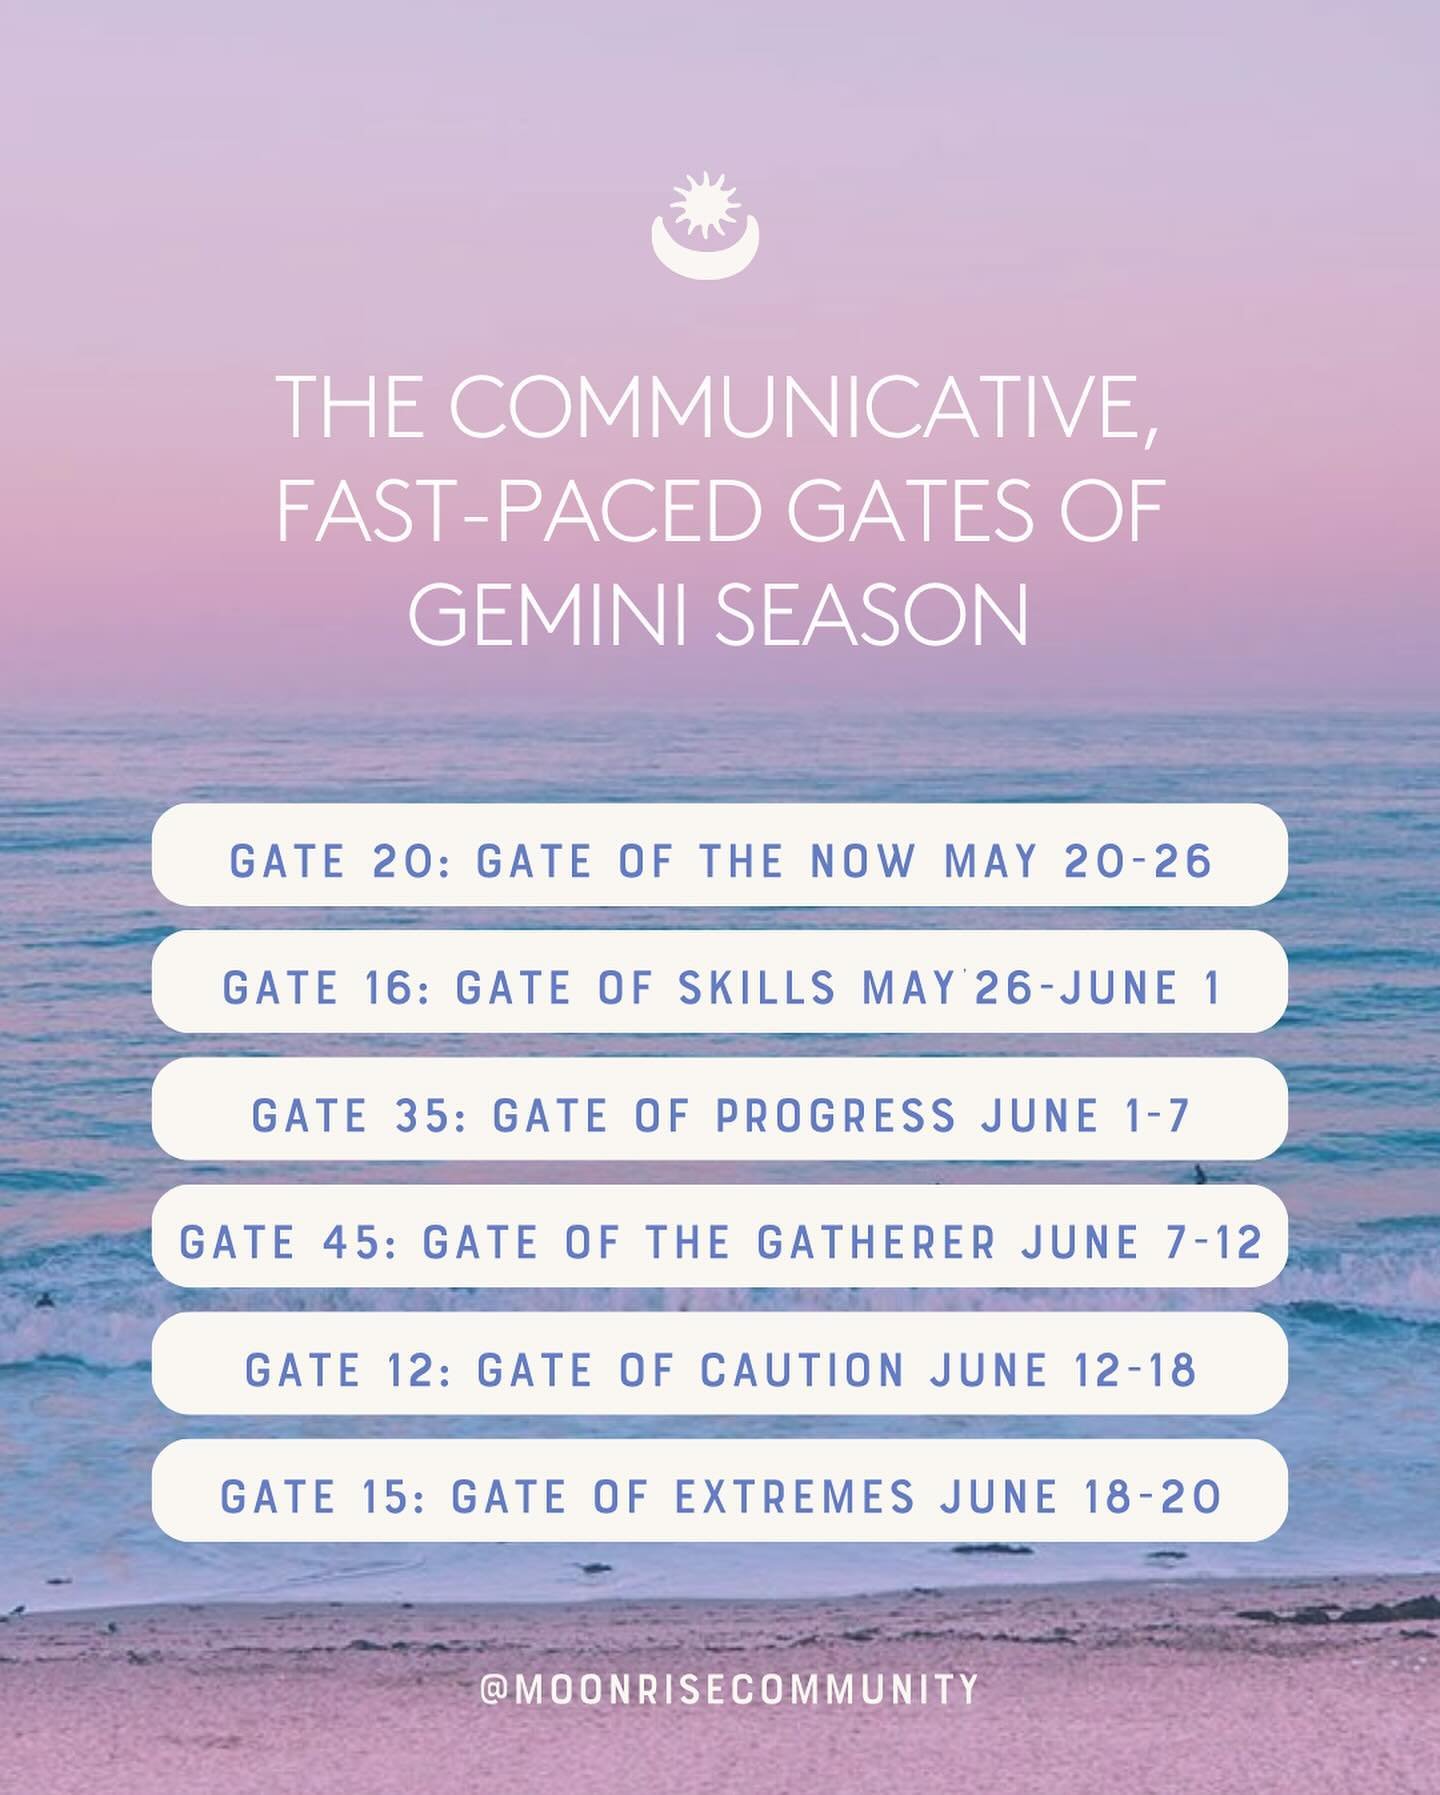 Welcome to Gemini season! ♊️🦋🎙️🗣️🌬️

We officially moved into this fast-paced, communicative air sign this morning. The winds of change and summer season in the Northern hemisphere are officially upon us. 

May we lean into the expansive new idea